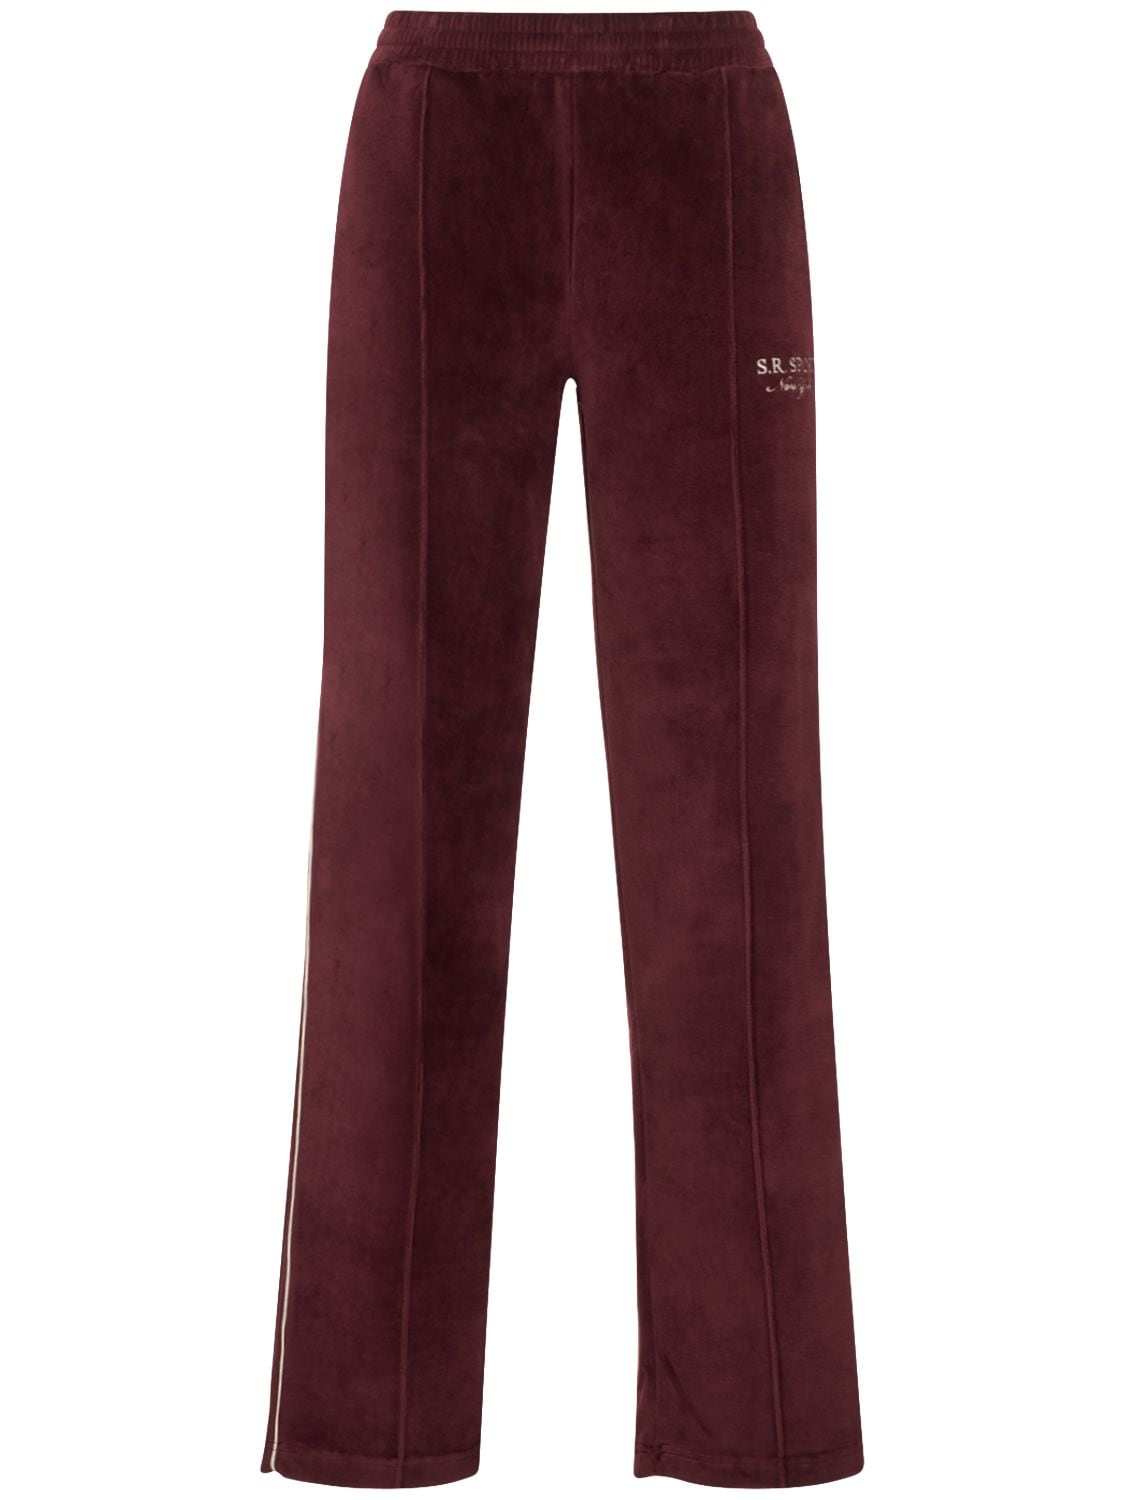 SPORTY AND RICH BRANDIE VELOUR TRACK PANTS